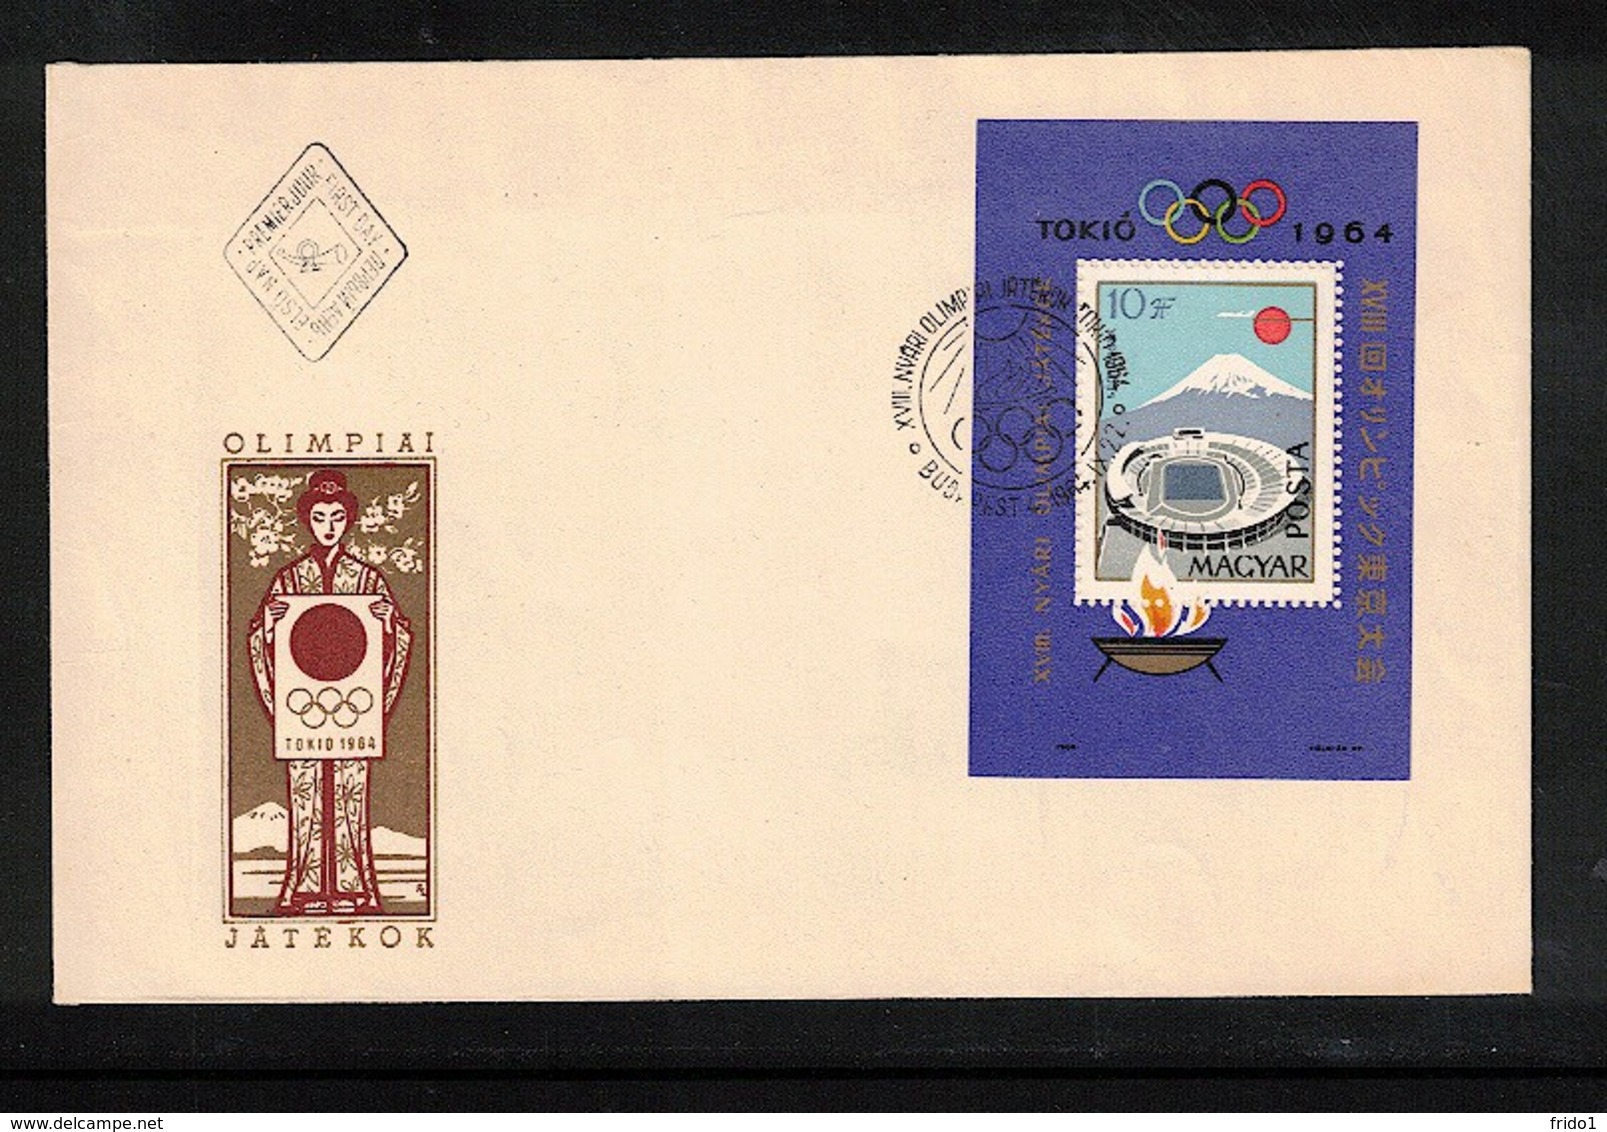 Hungary / Ungarn 1964 Olympic Games Tokyo Michel Block 43A FDC - Sommer 1964: Tokio